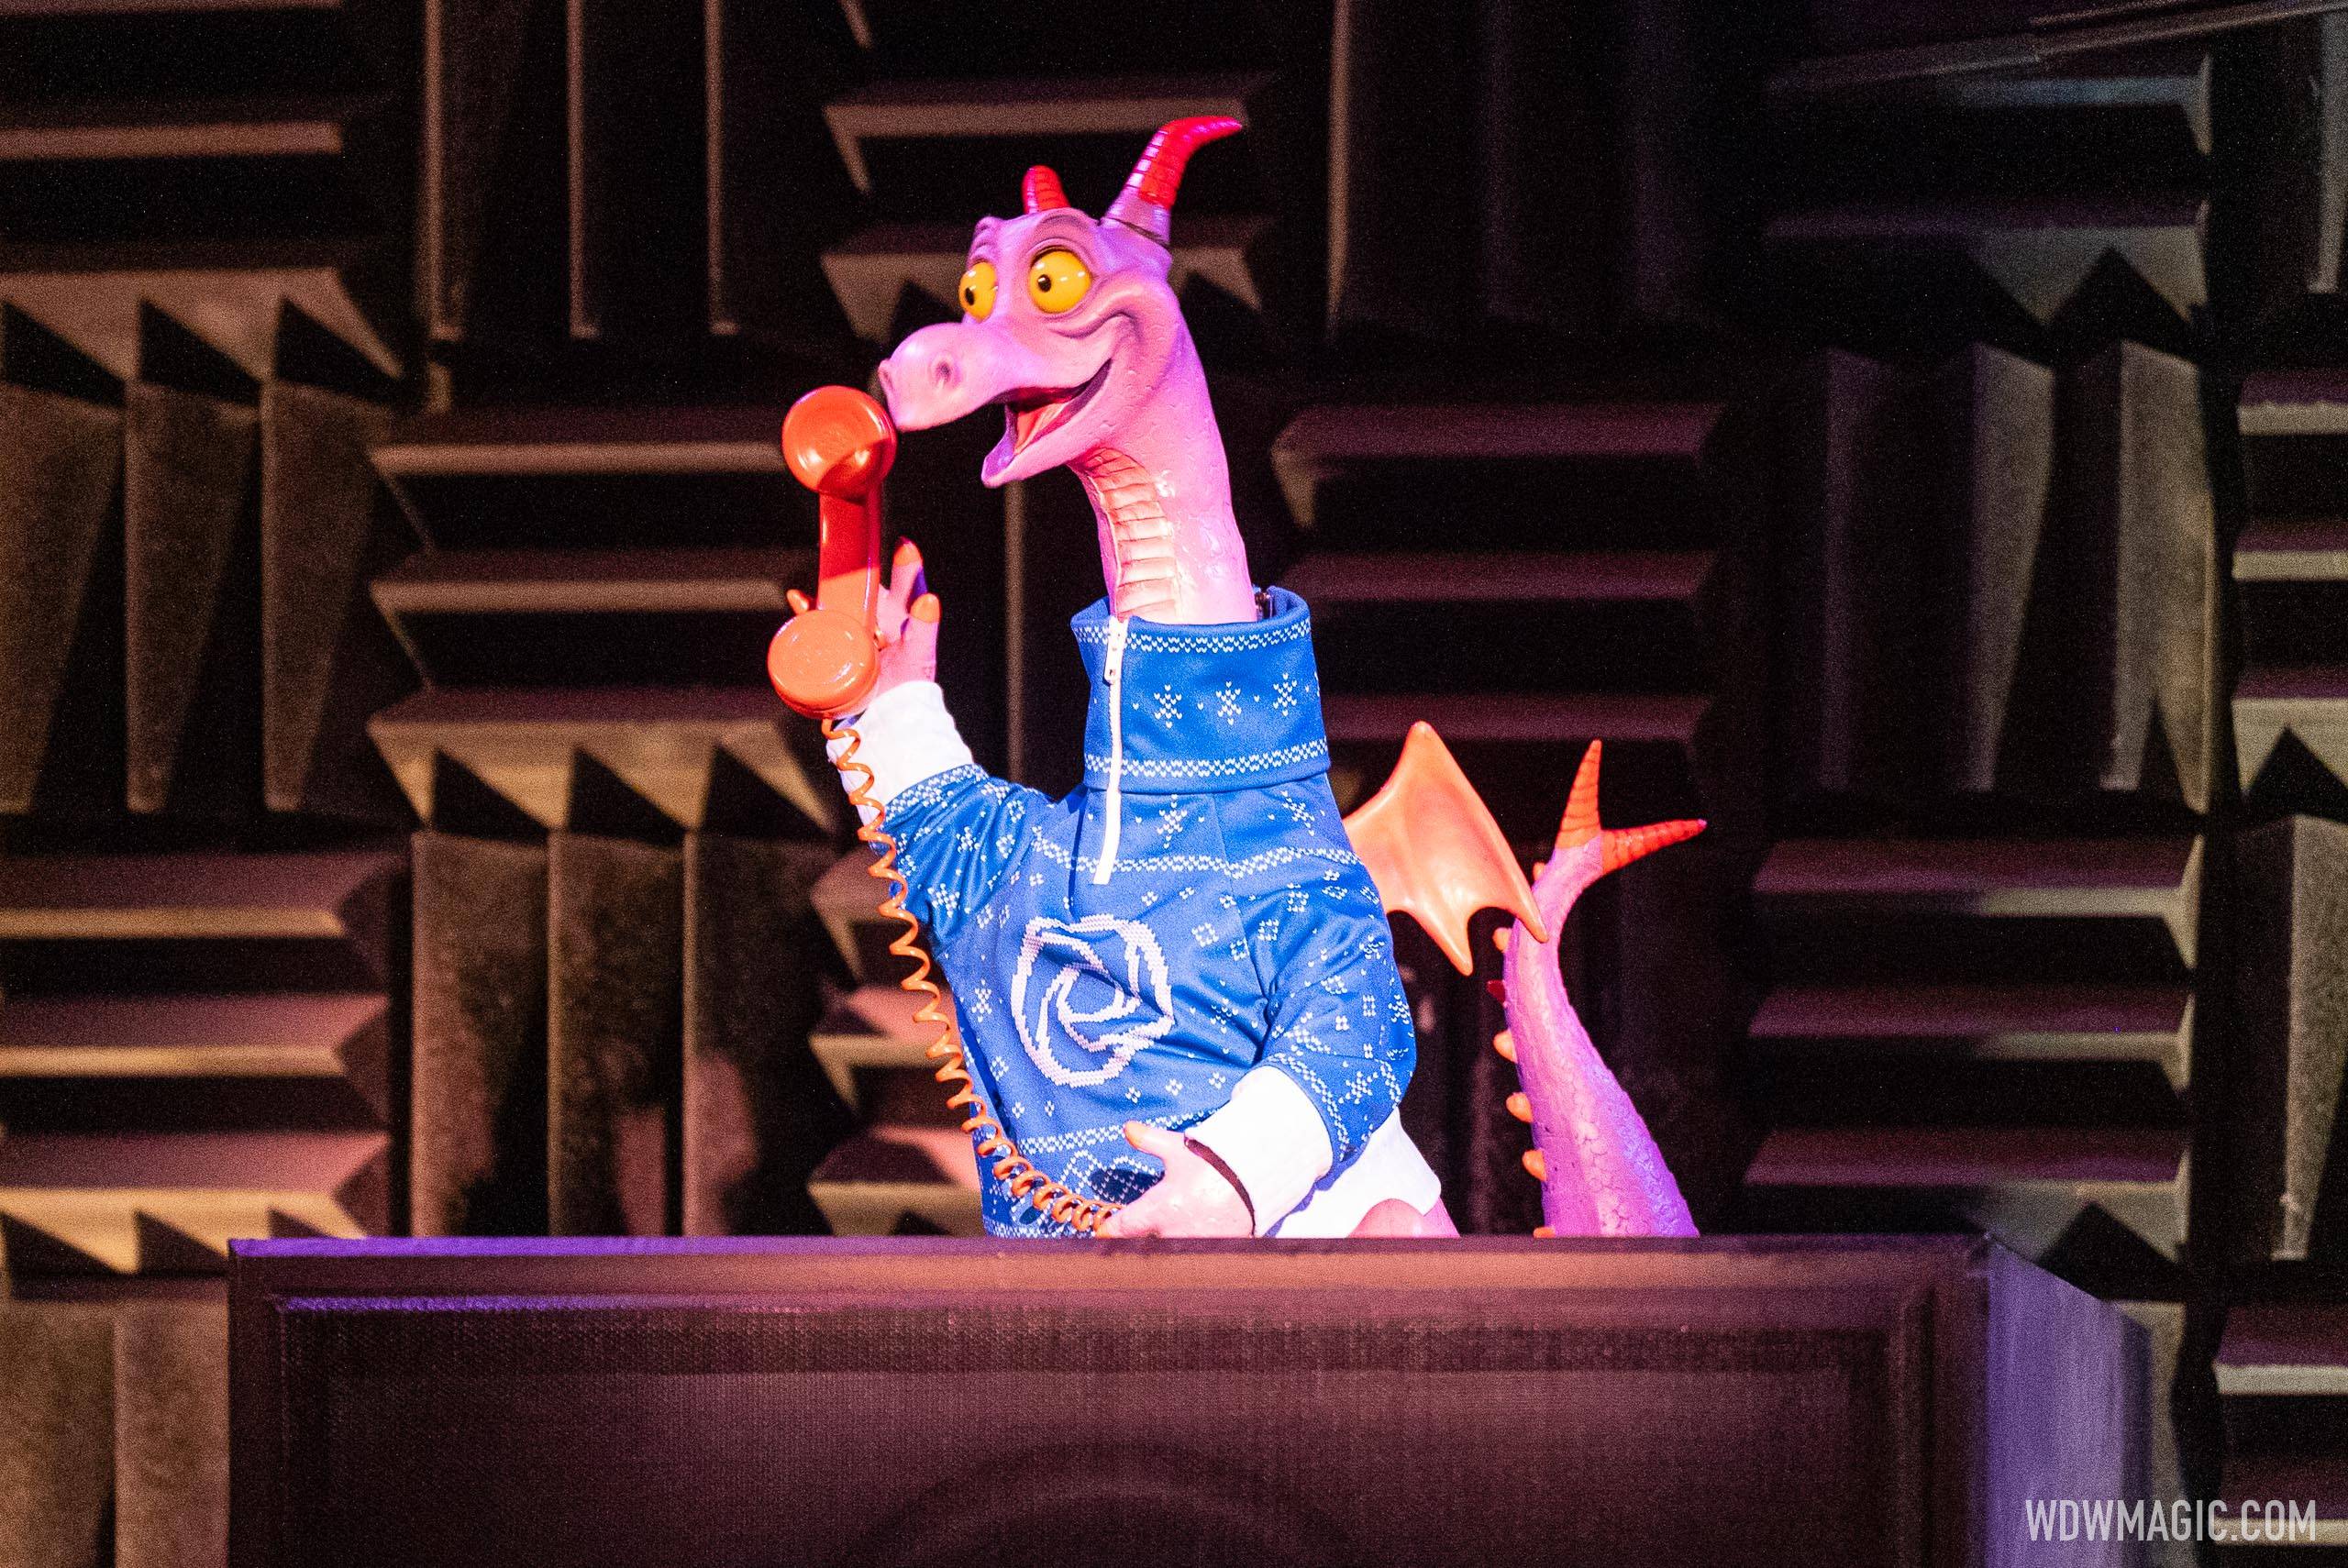 EPCOT's Figment celebrates another Disney holiday season in a seasonal sweater